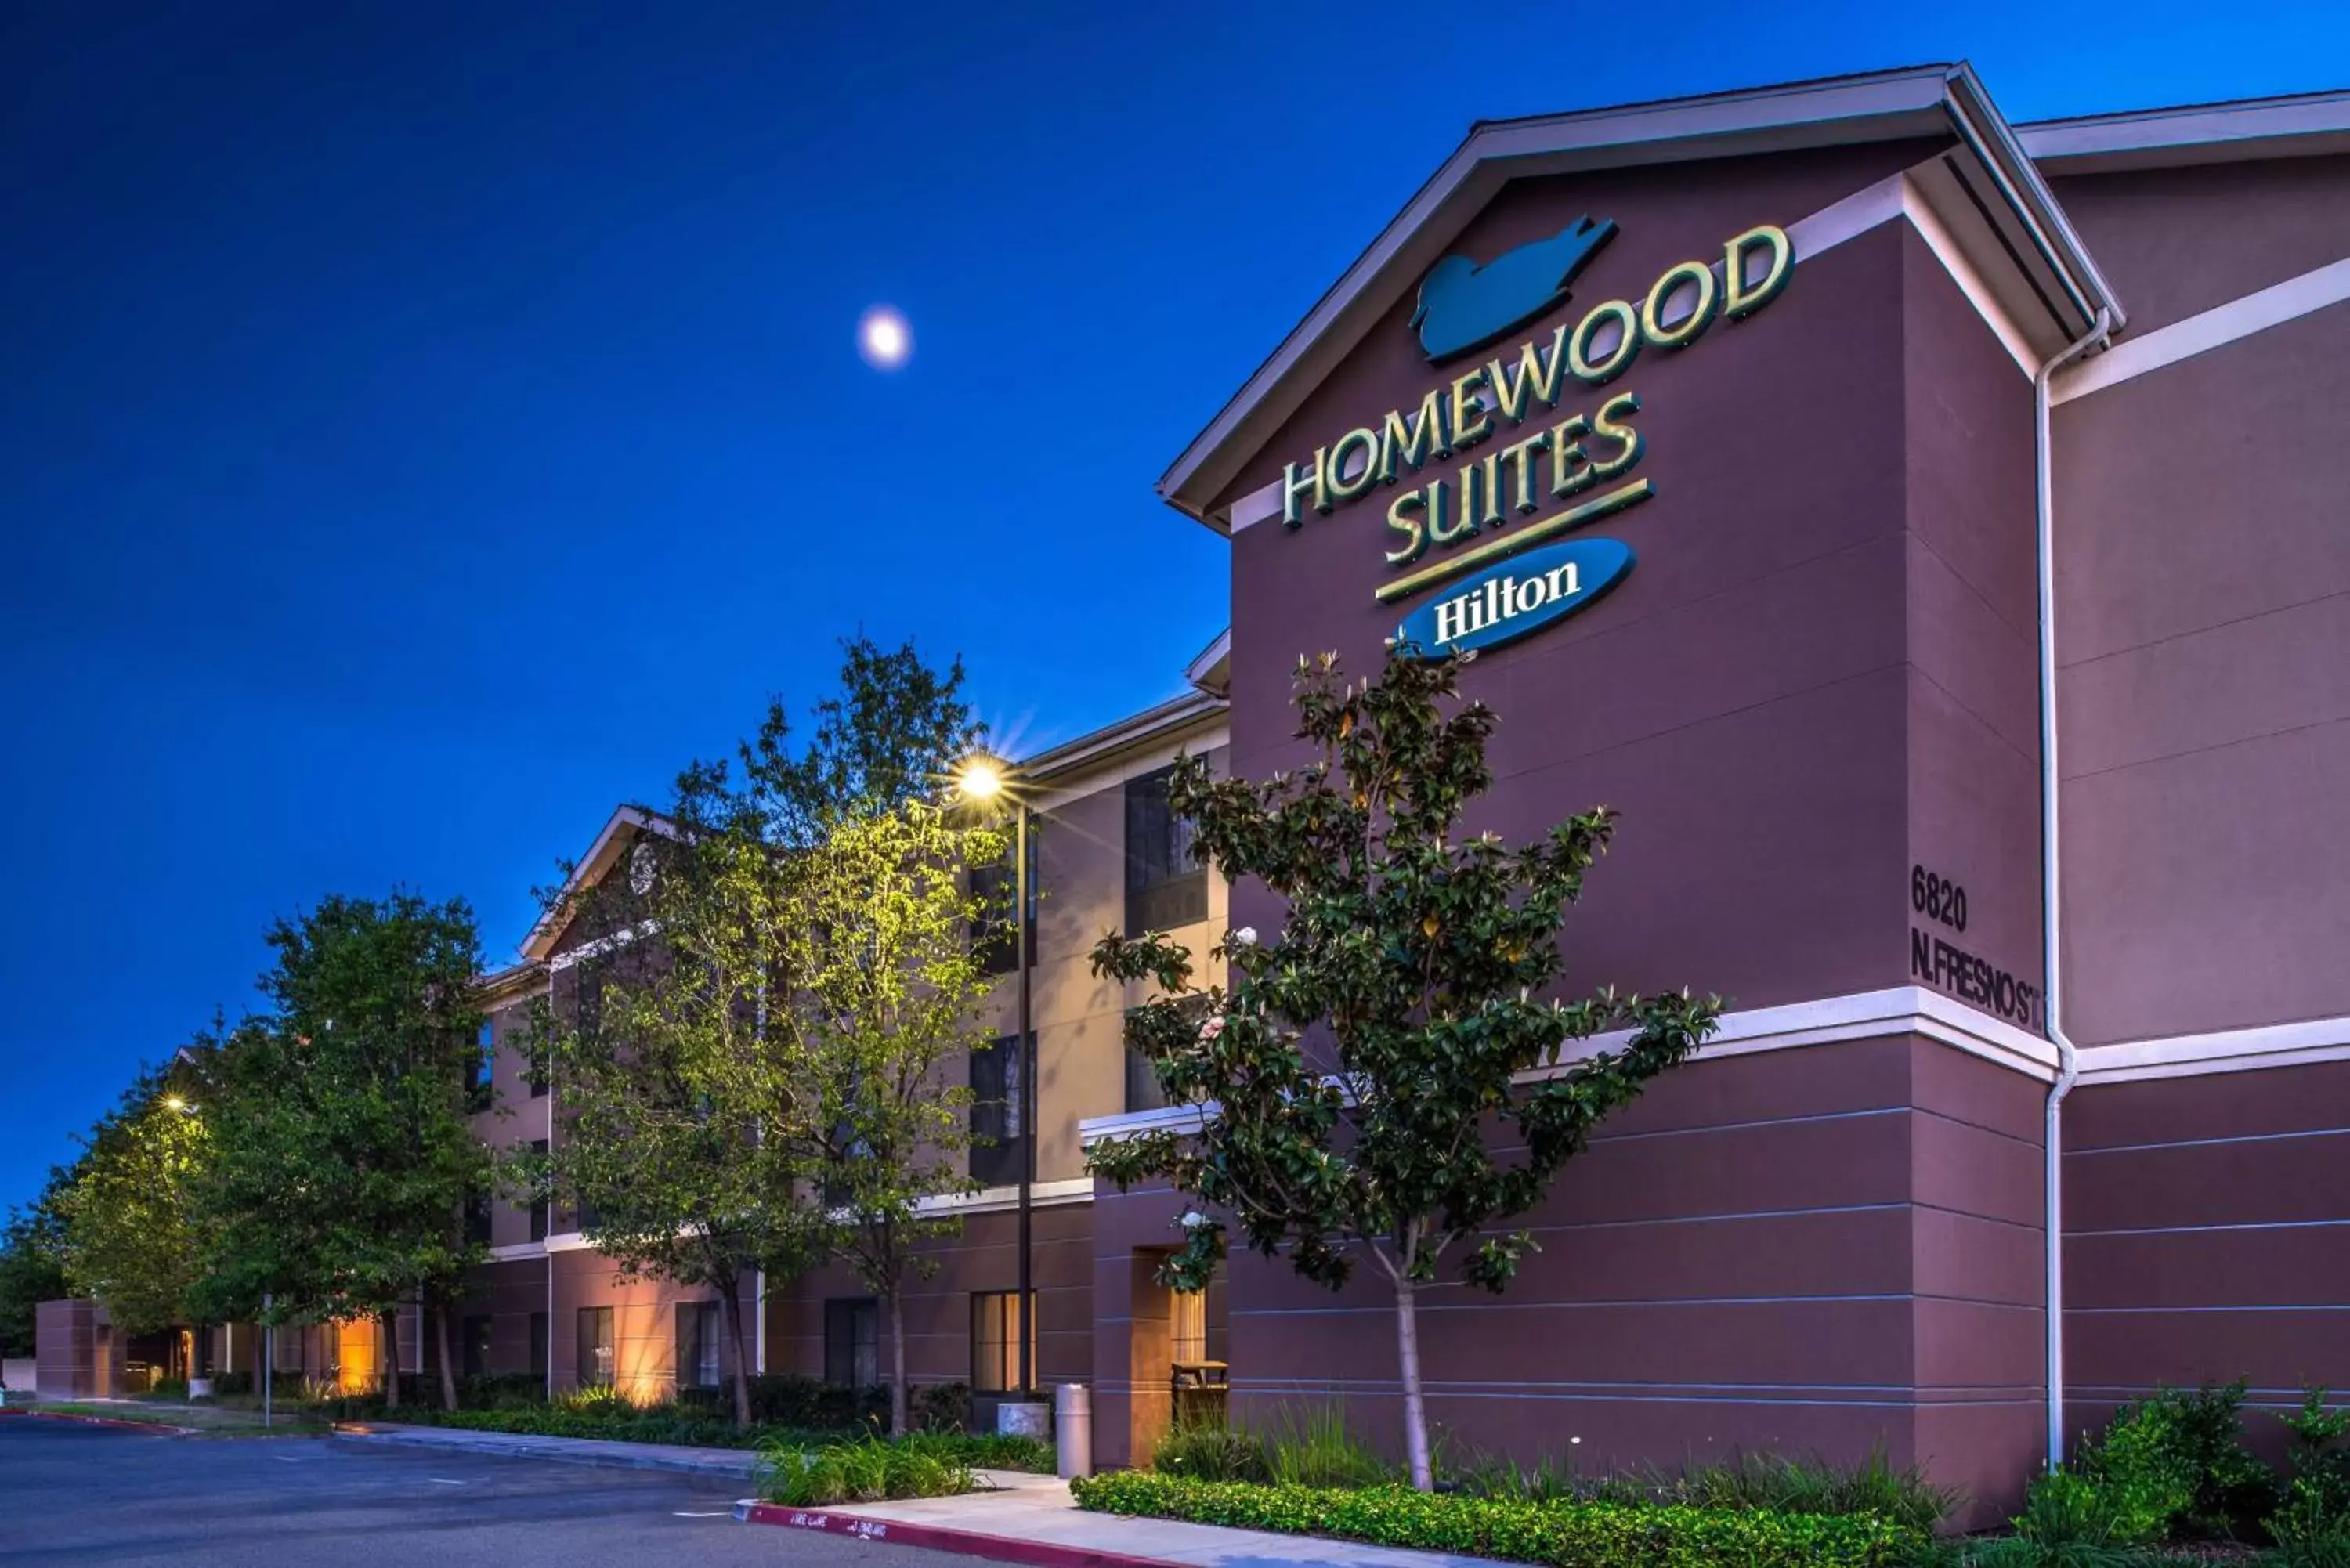 Property Building in Homewood Suites by Hilton Fresno